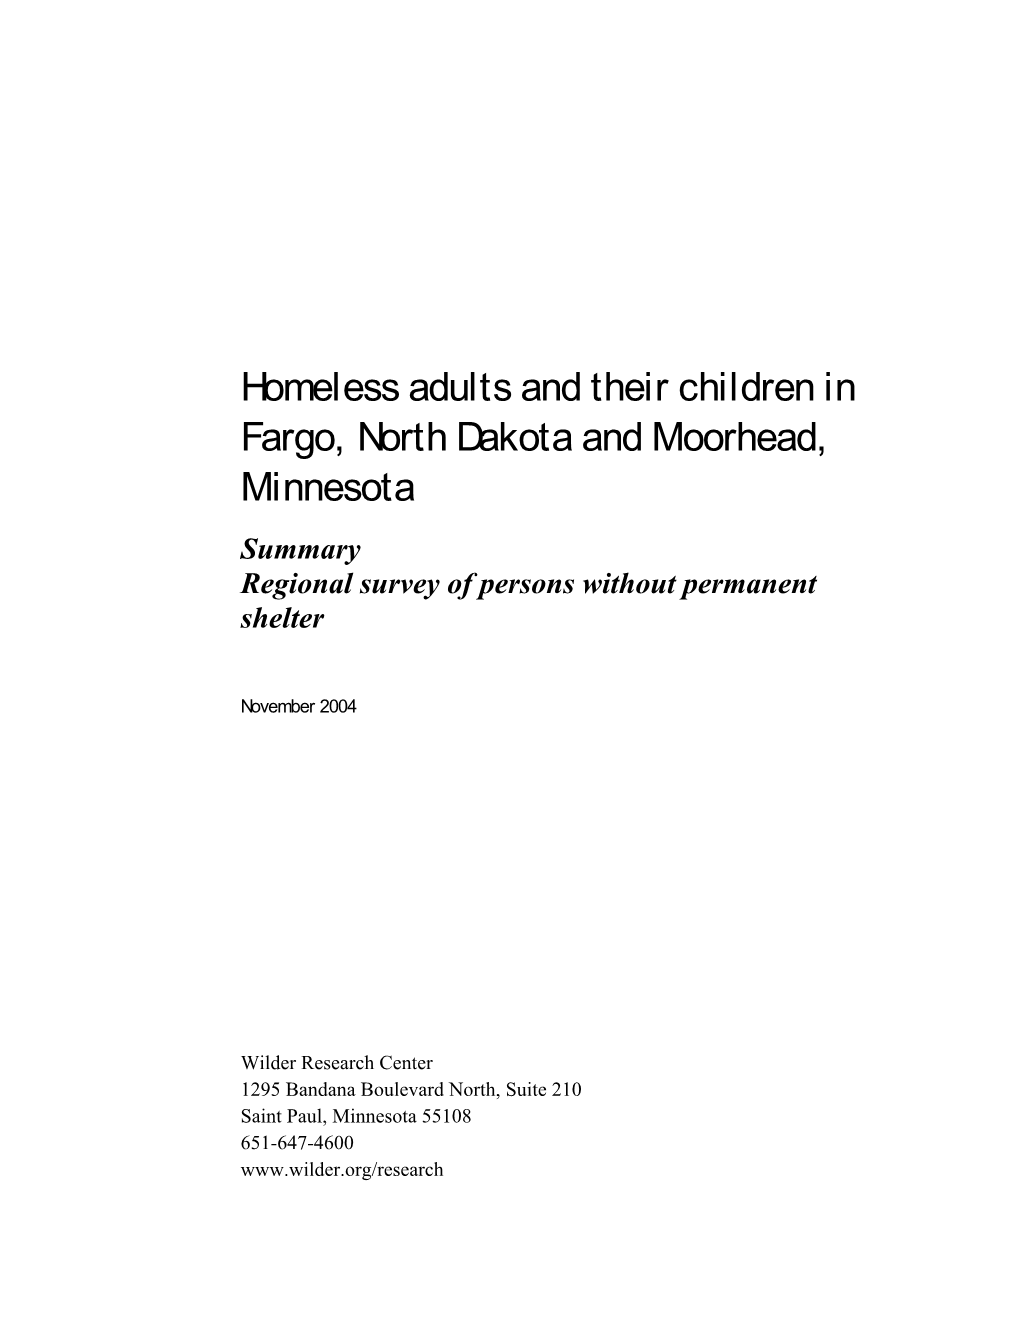 Homeless Adults and Their Children in Fargo, North Dakota and Moorhead, Minnesota Summary Regional Survey of Persons Without Permanent Shelter